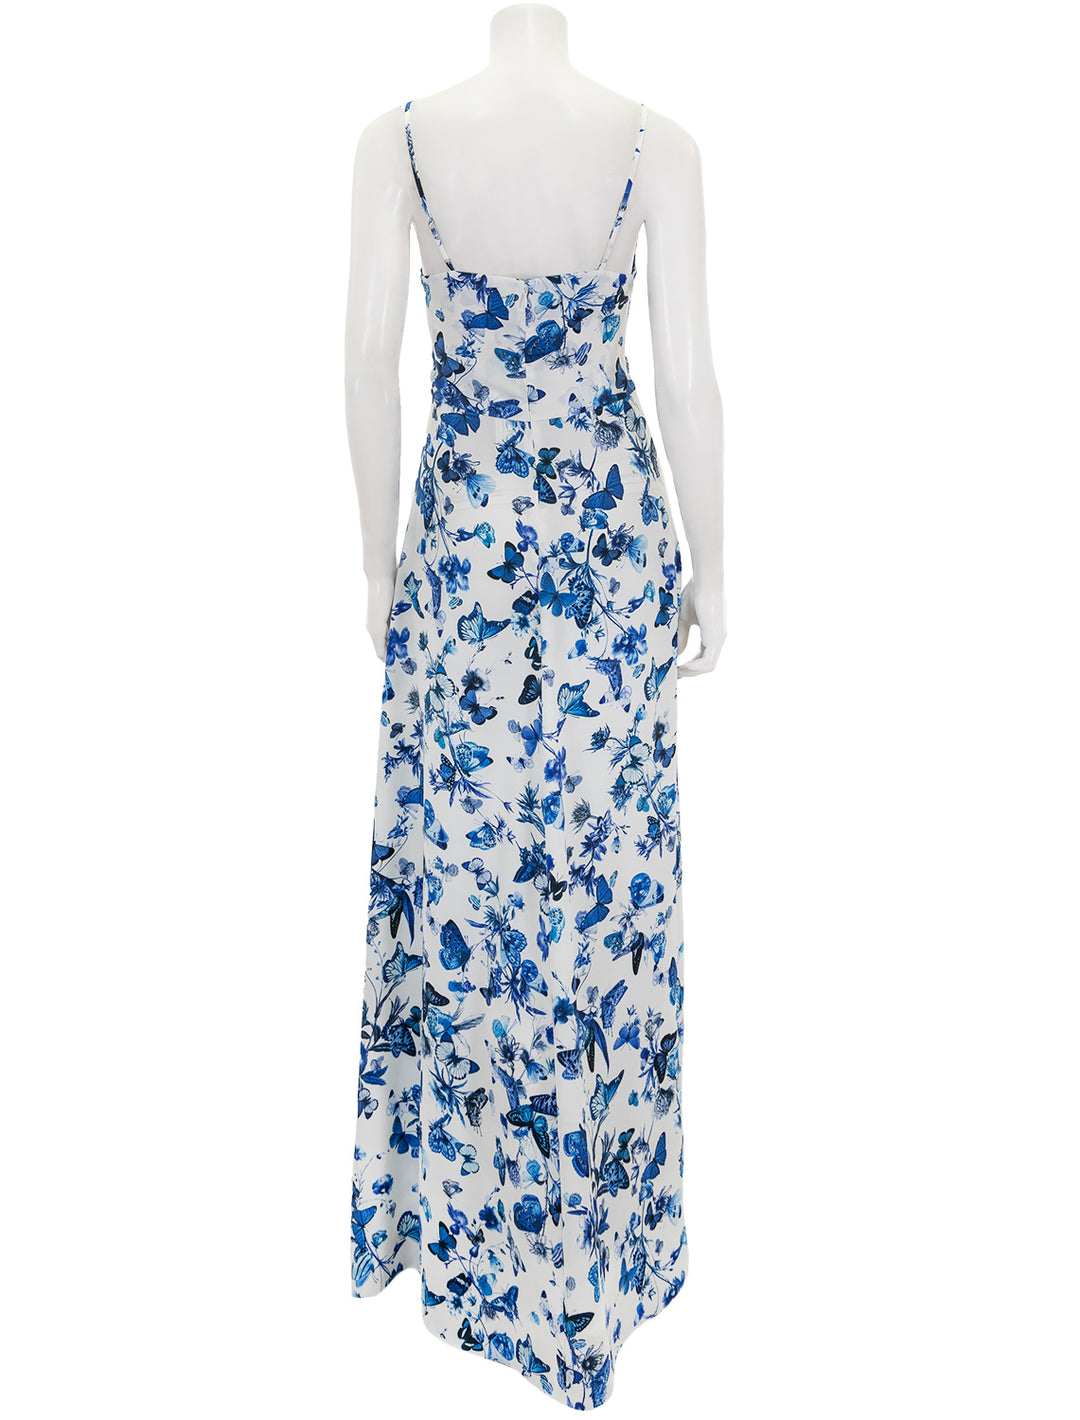 Back view of L'agence's porter twisted front dress in white and blue.